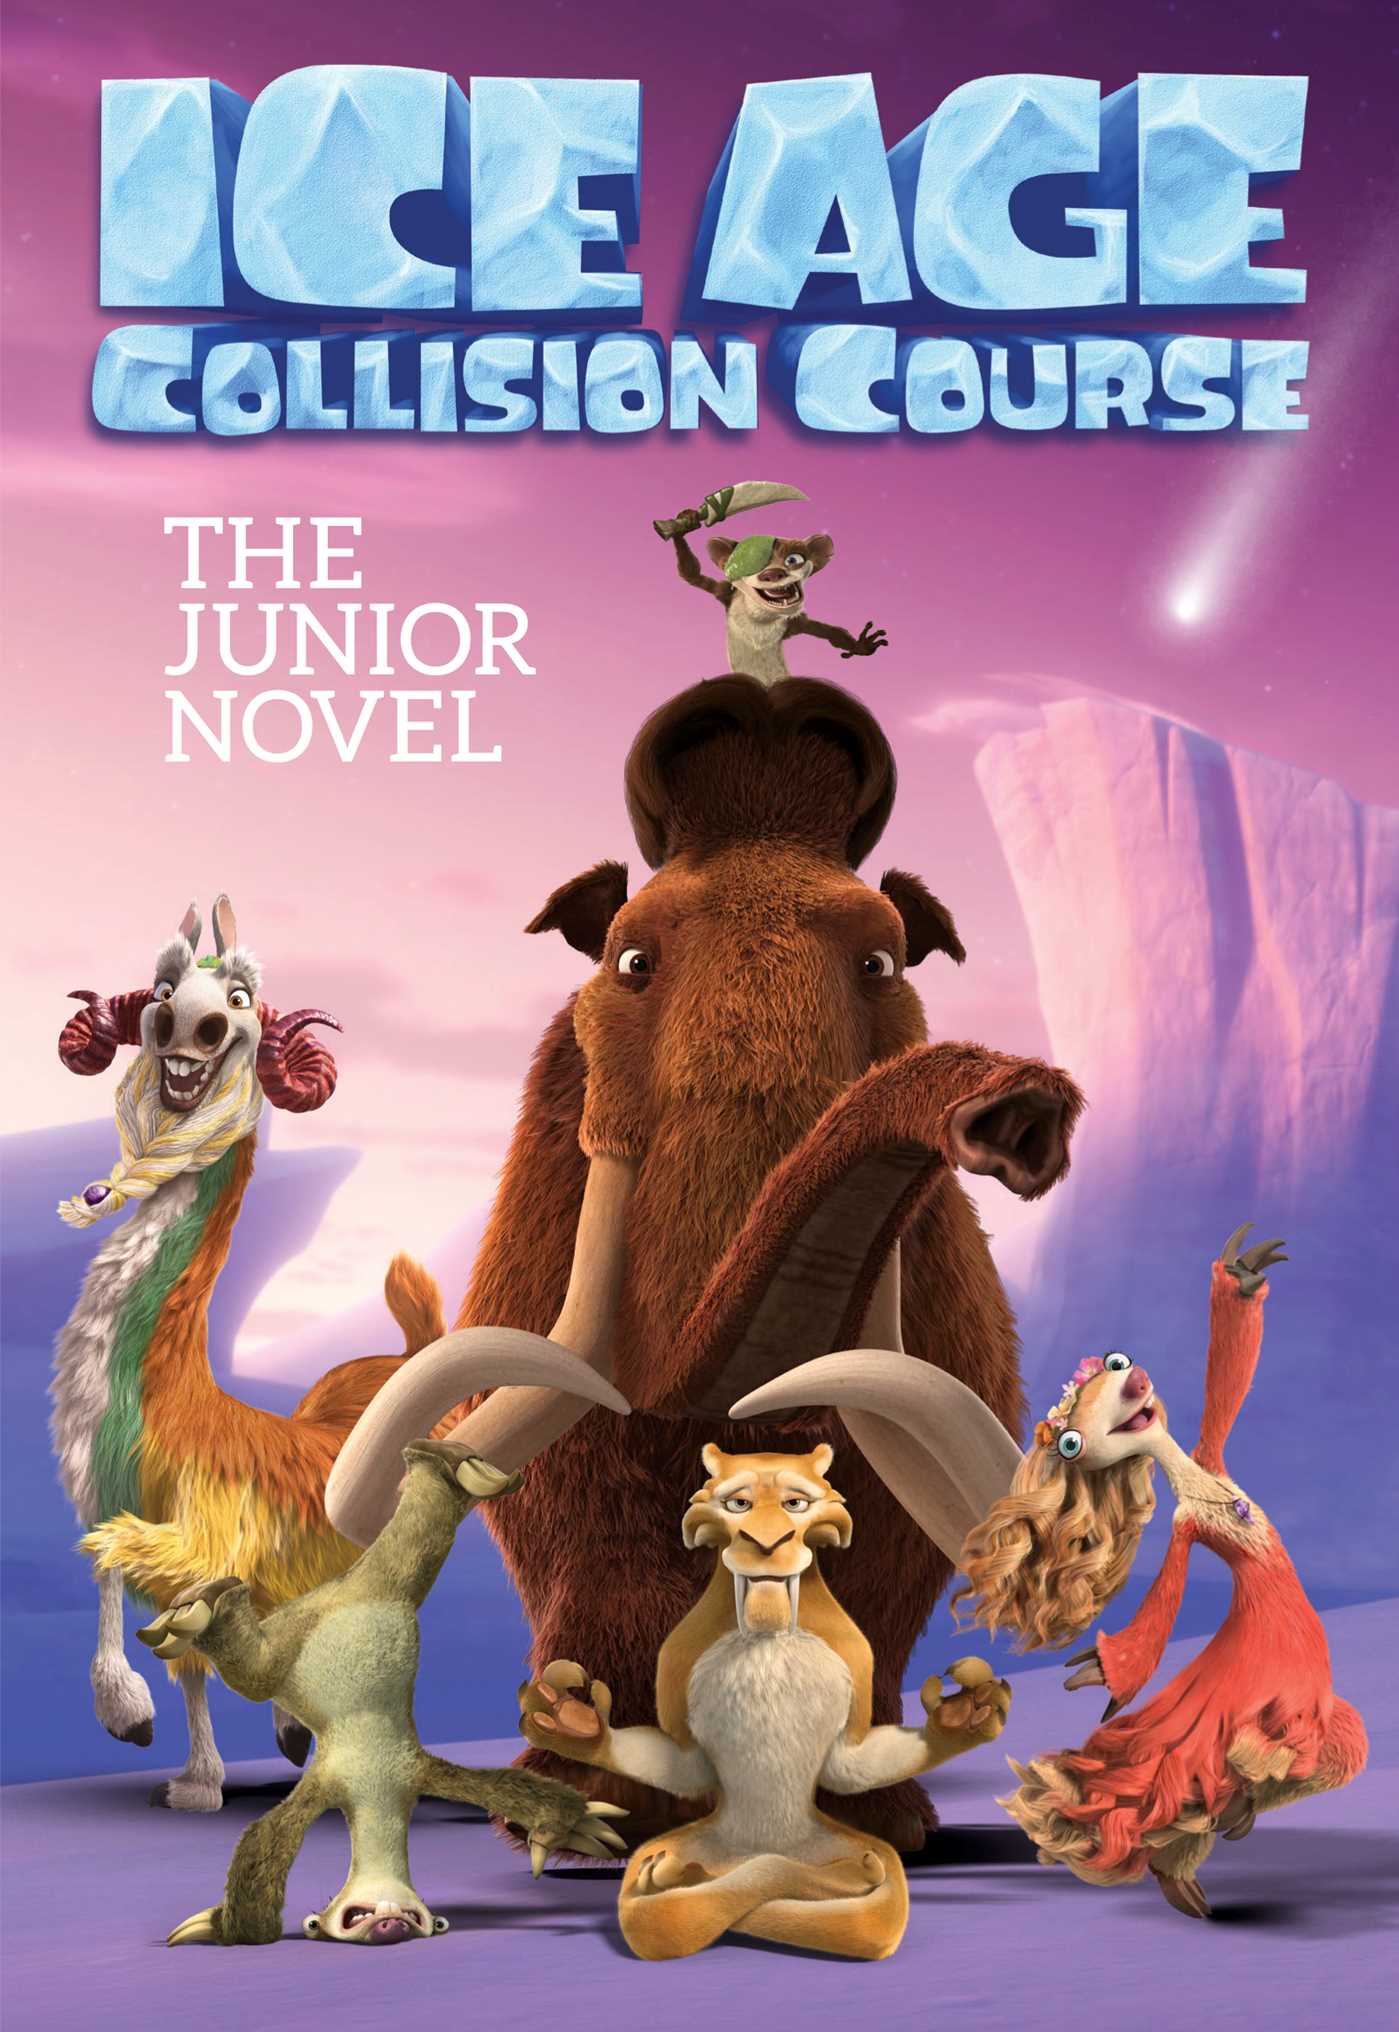 ice age 4 movie download in hindi